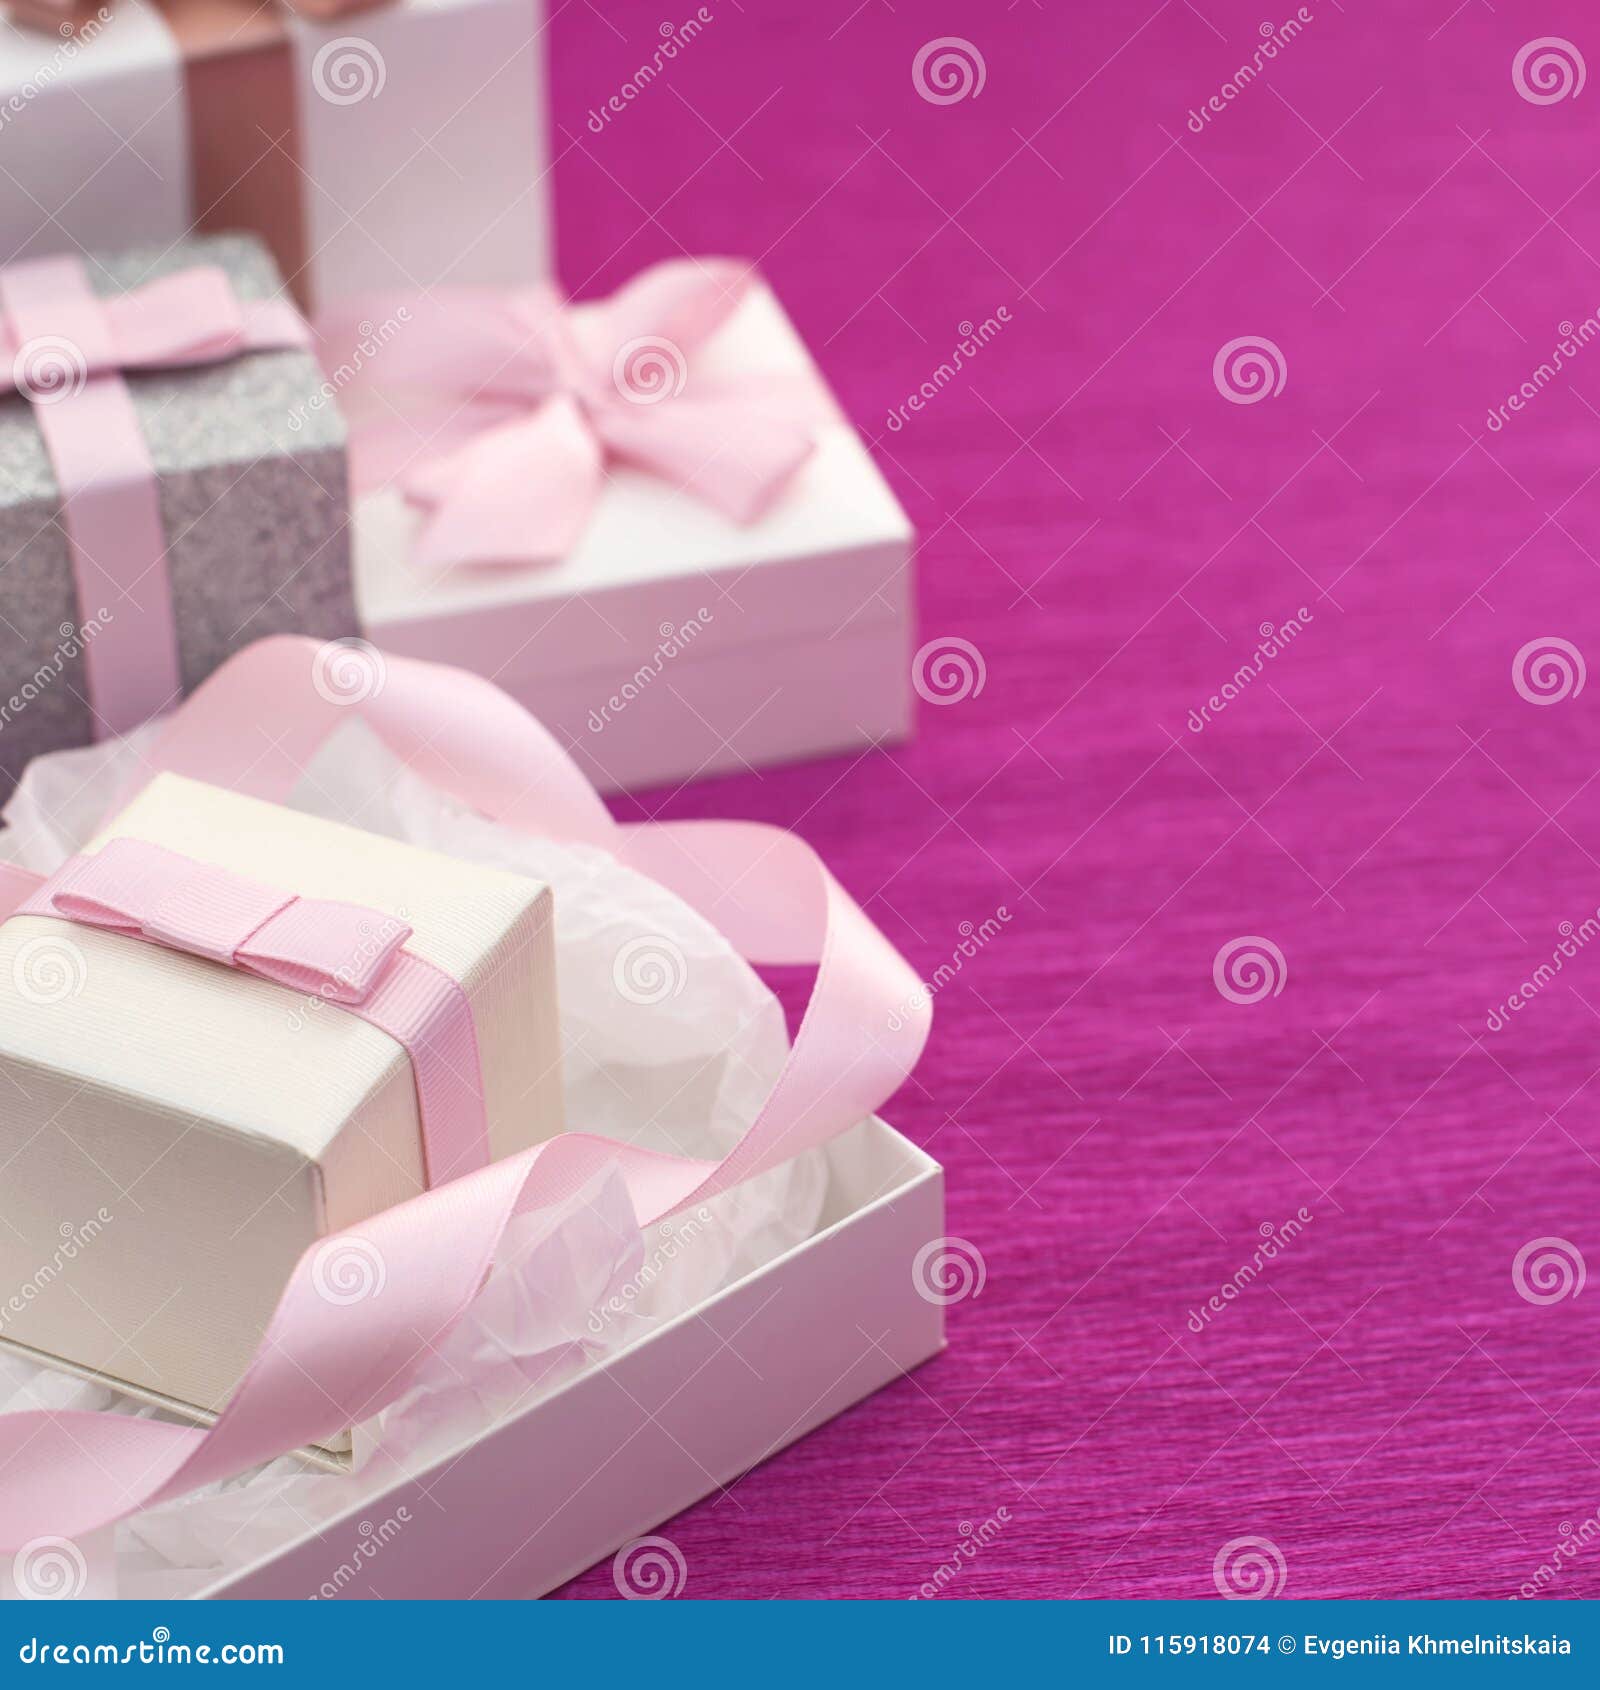 Festive Composition With Gift Box On A Bright Pink